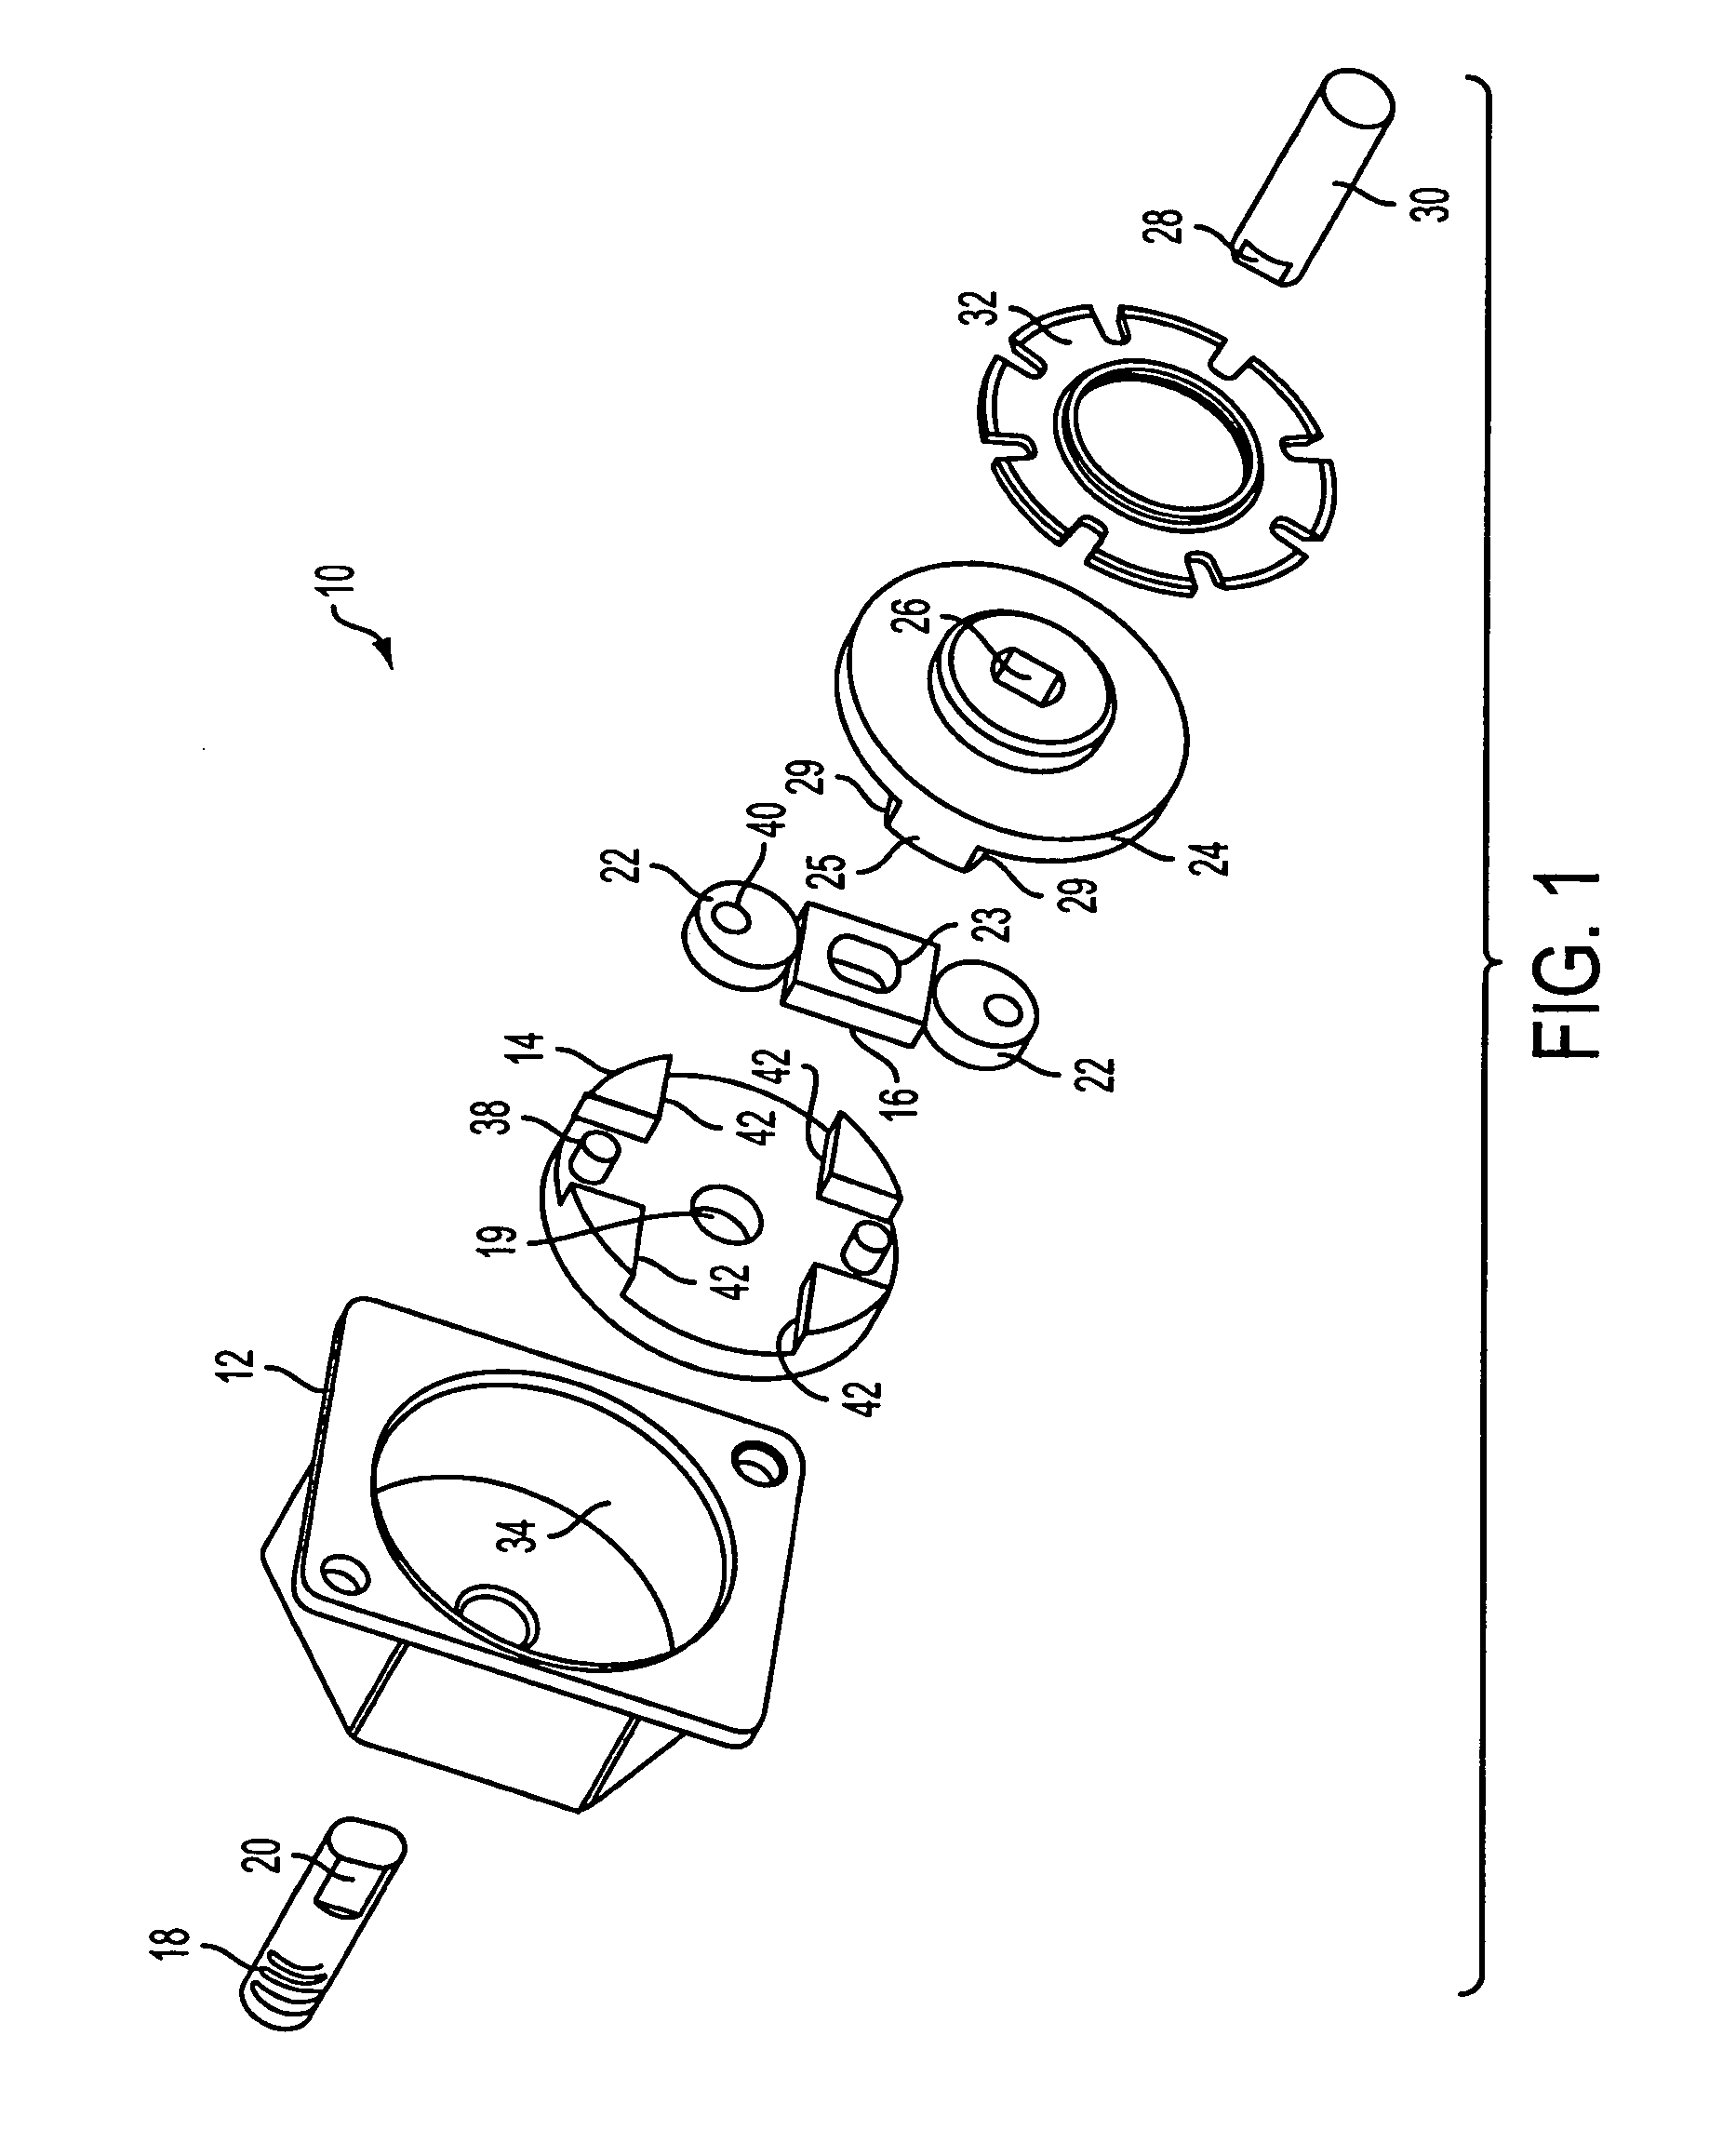 Bi-directional friction clutch assembly for electric motors to prevent backdrive